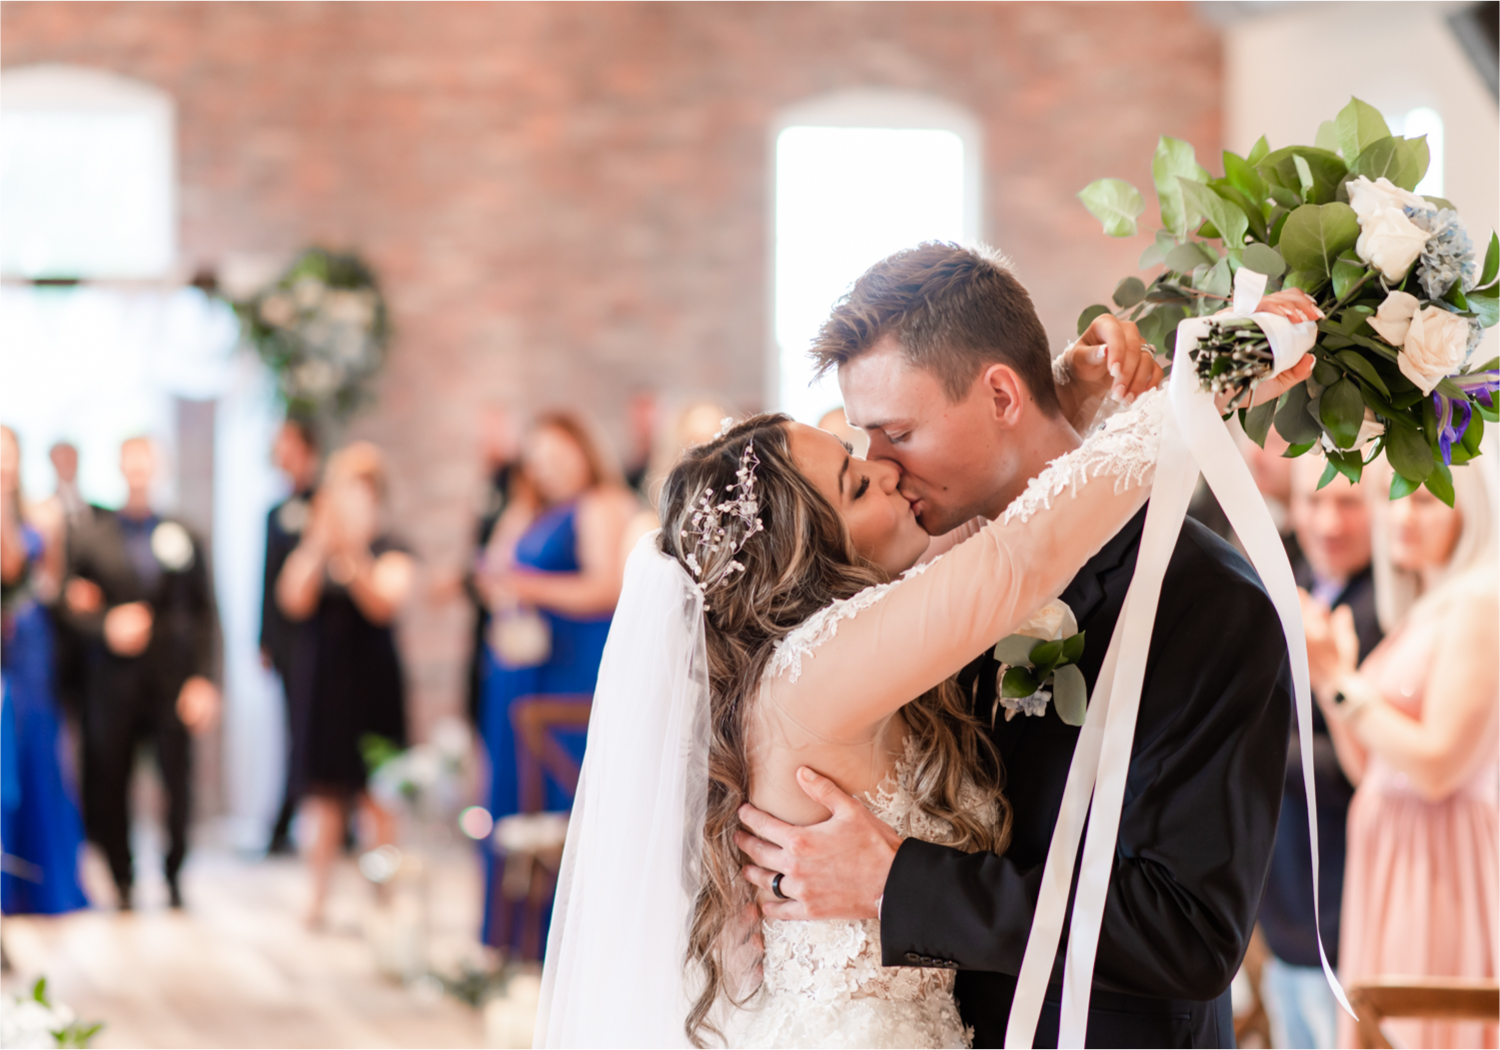 Romantic and Rustic Wedding at The Mill in Windsor | Britni Girard Photography | Colorado based wedding photography and videography team | Bride and groom just married portraits